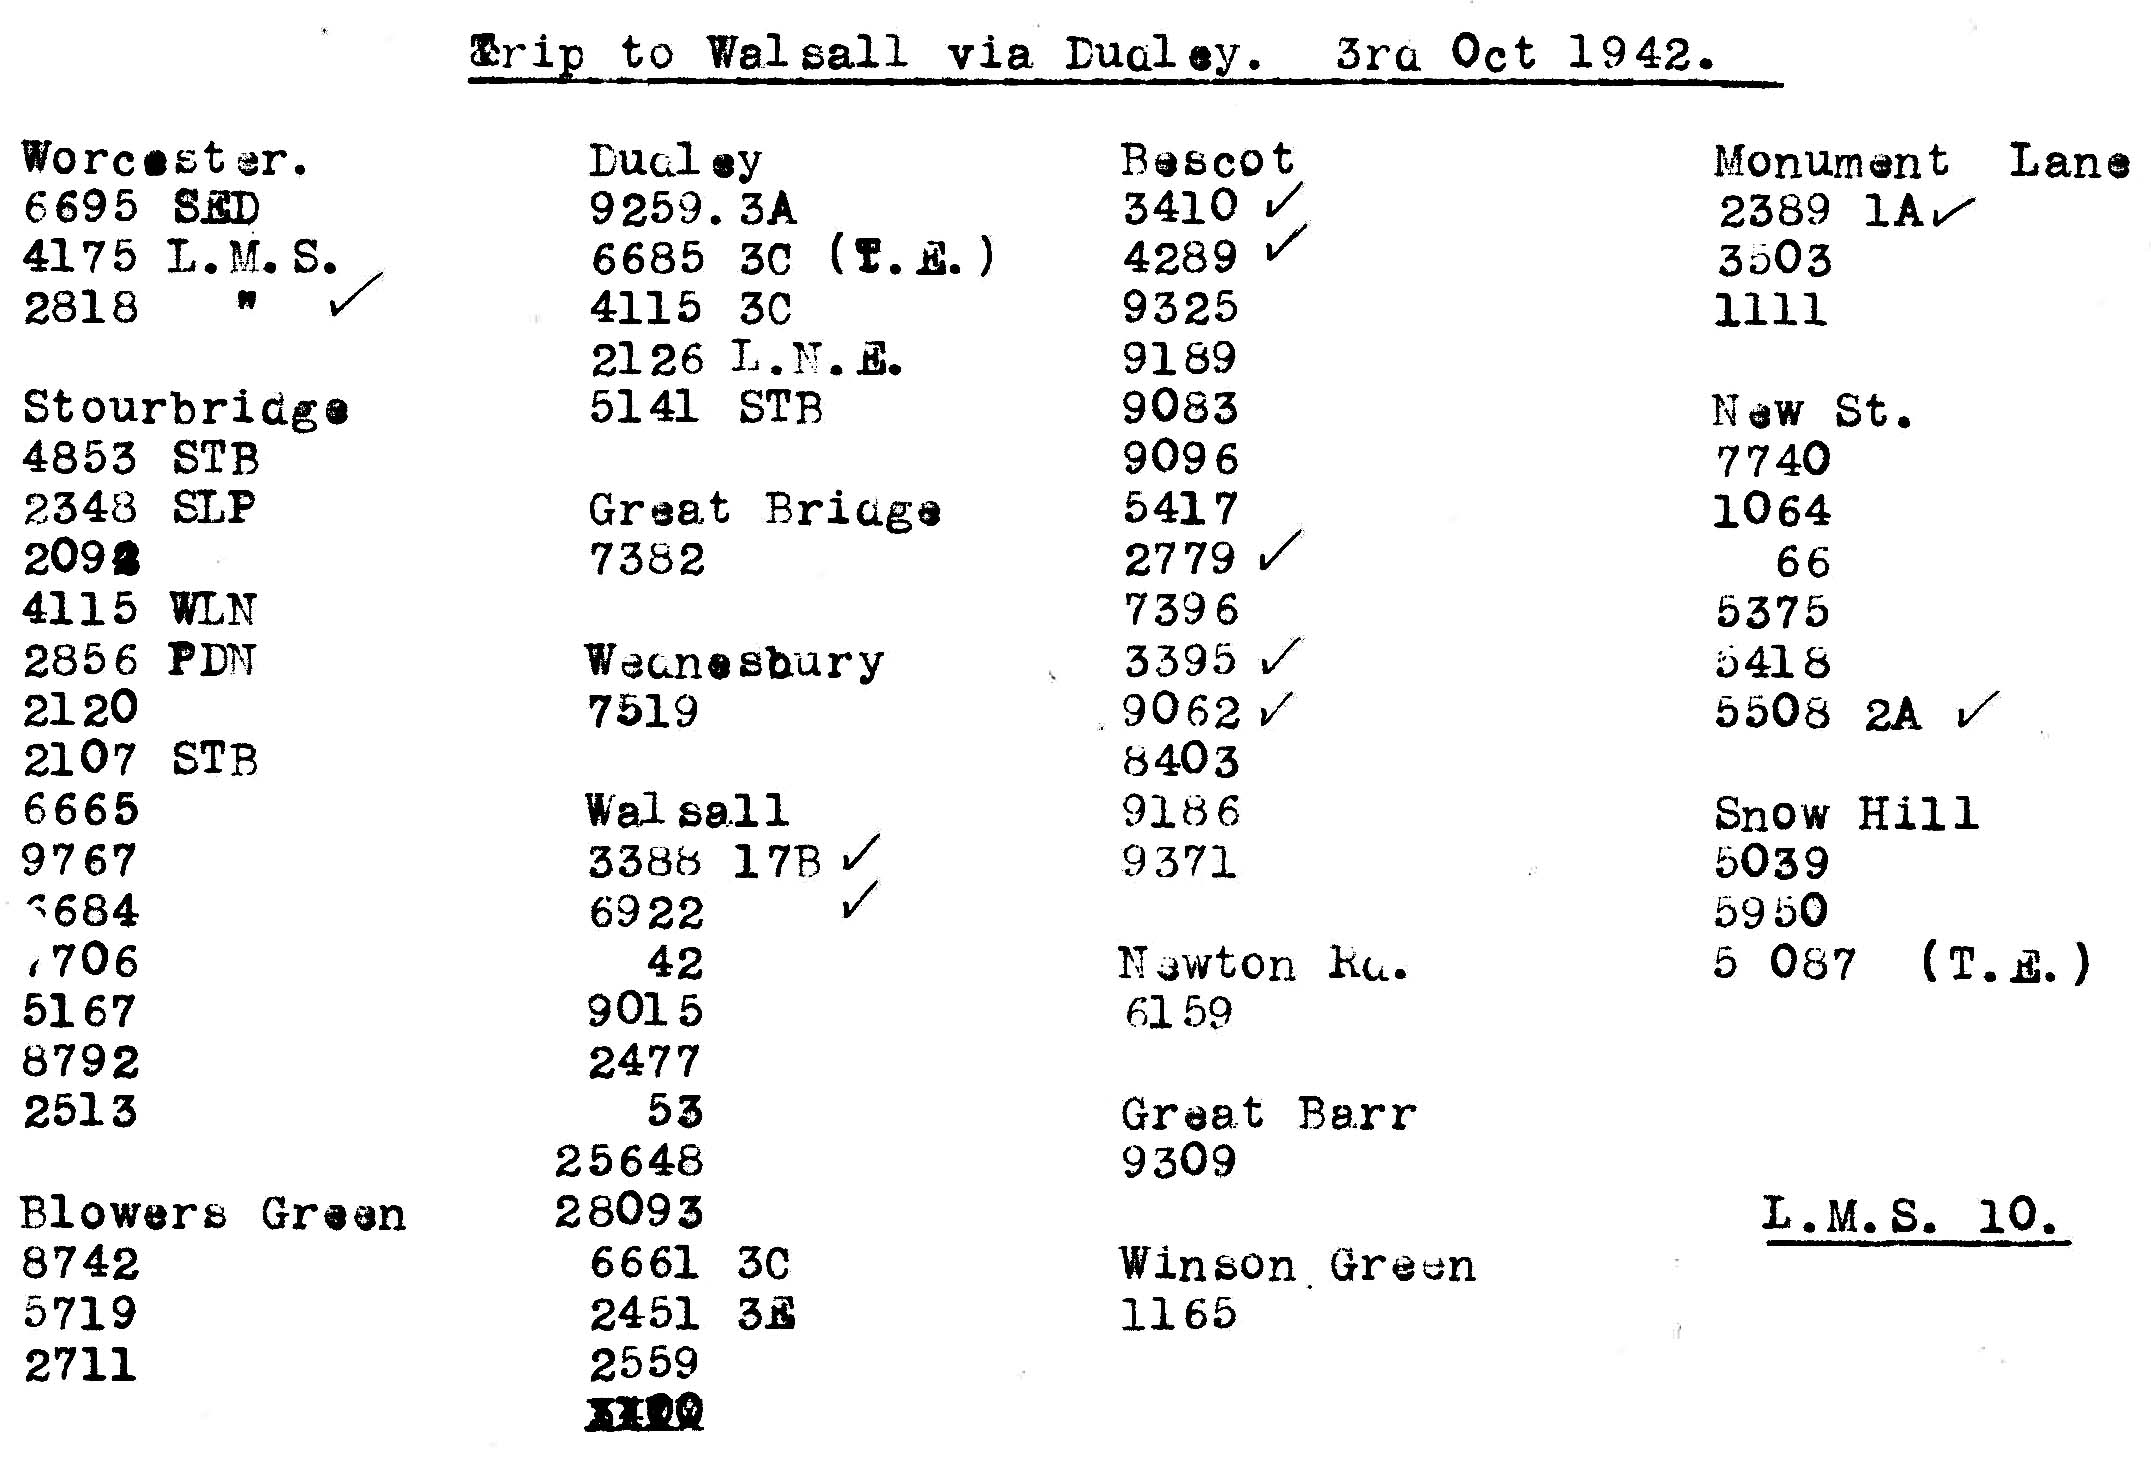 3rd October 1942 - Trip to Walsall via Dudley.